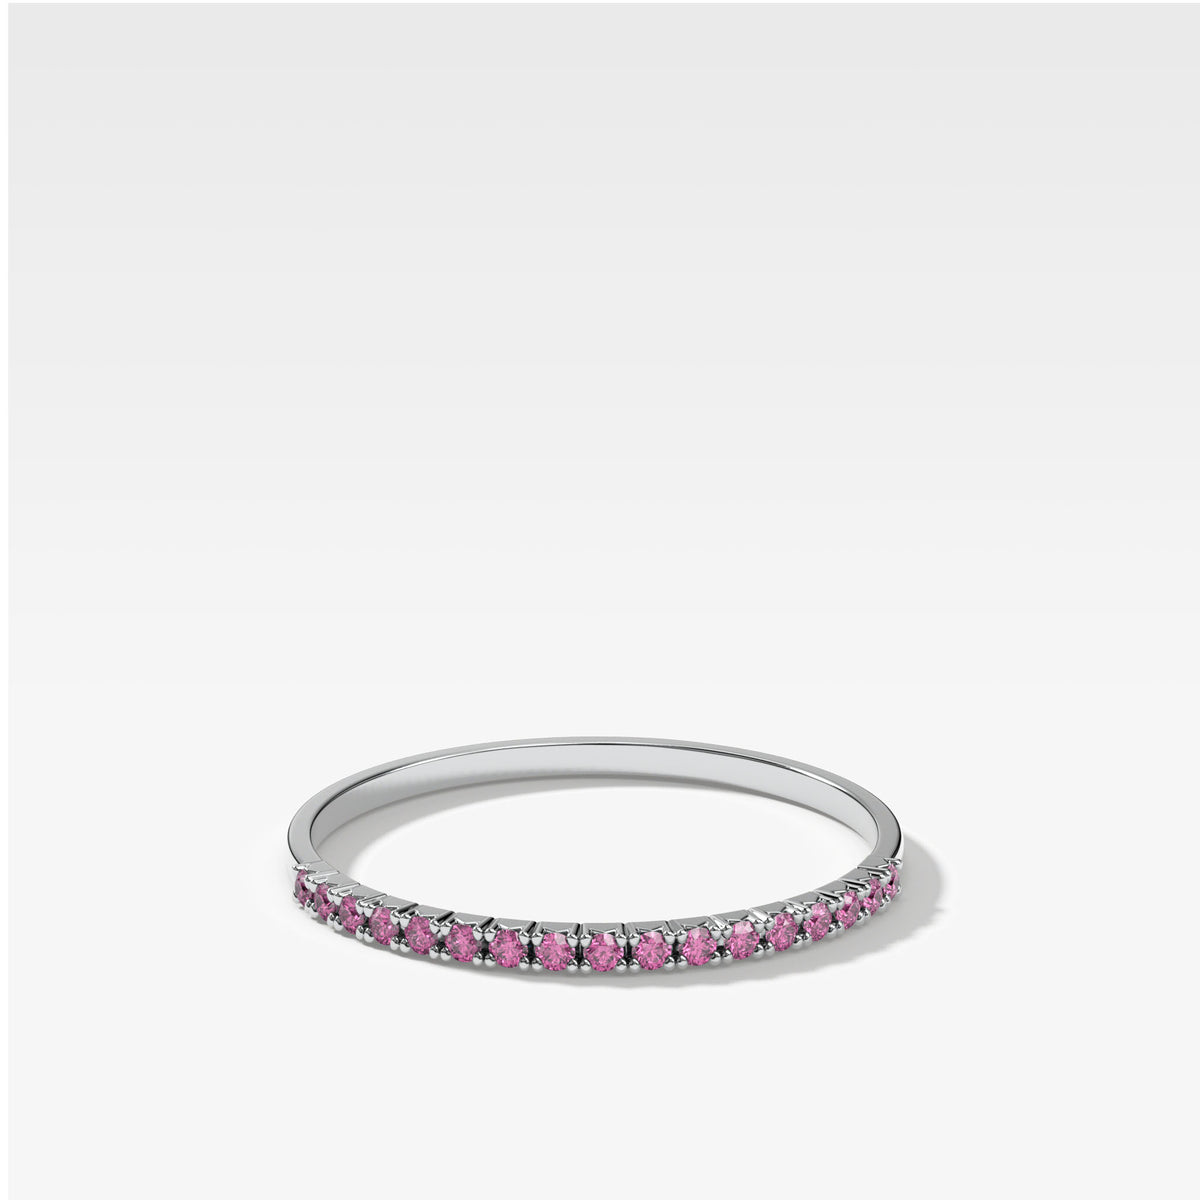 Petite French Pavé Wedding Band With Pink Sapphires